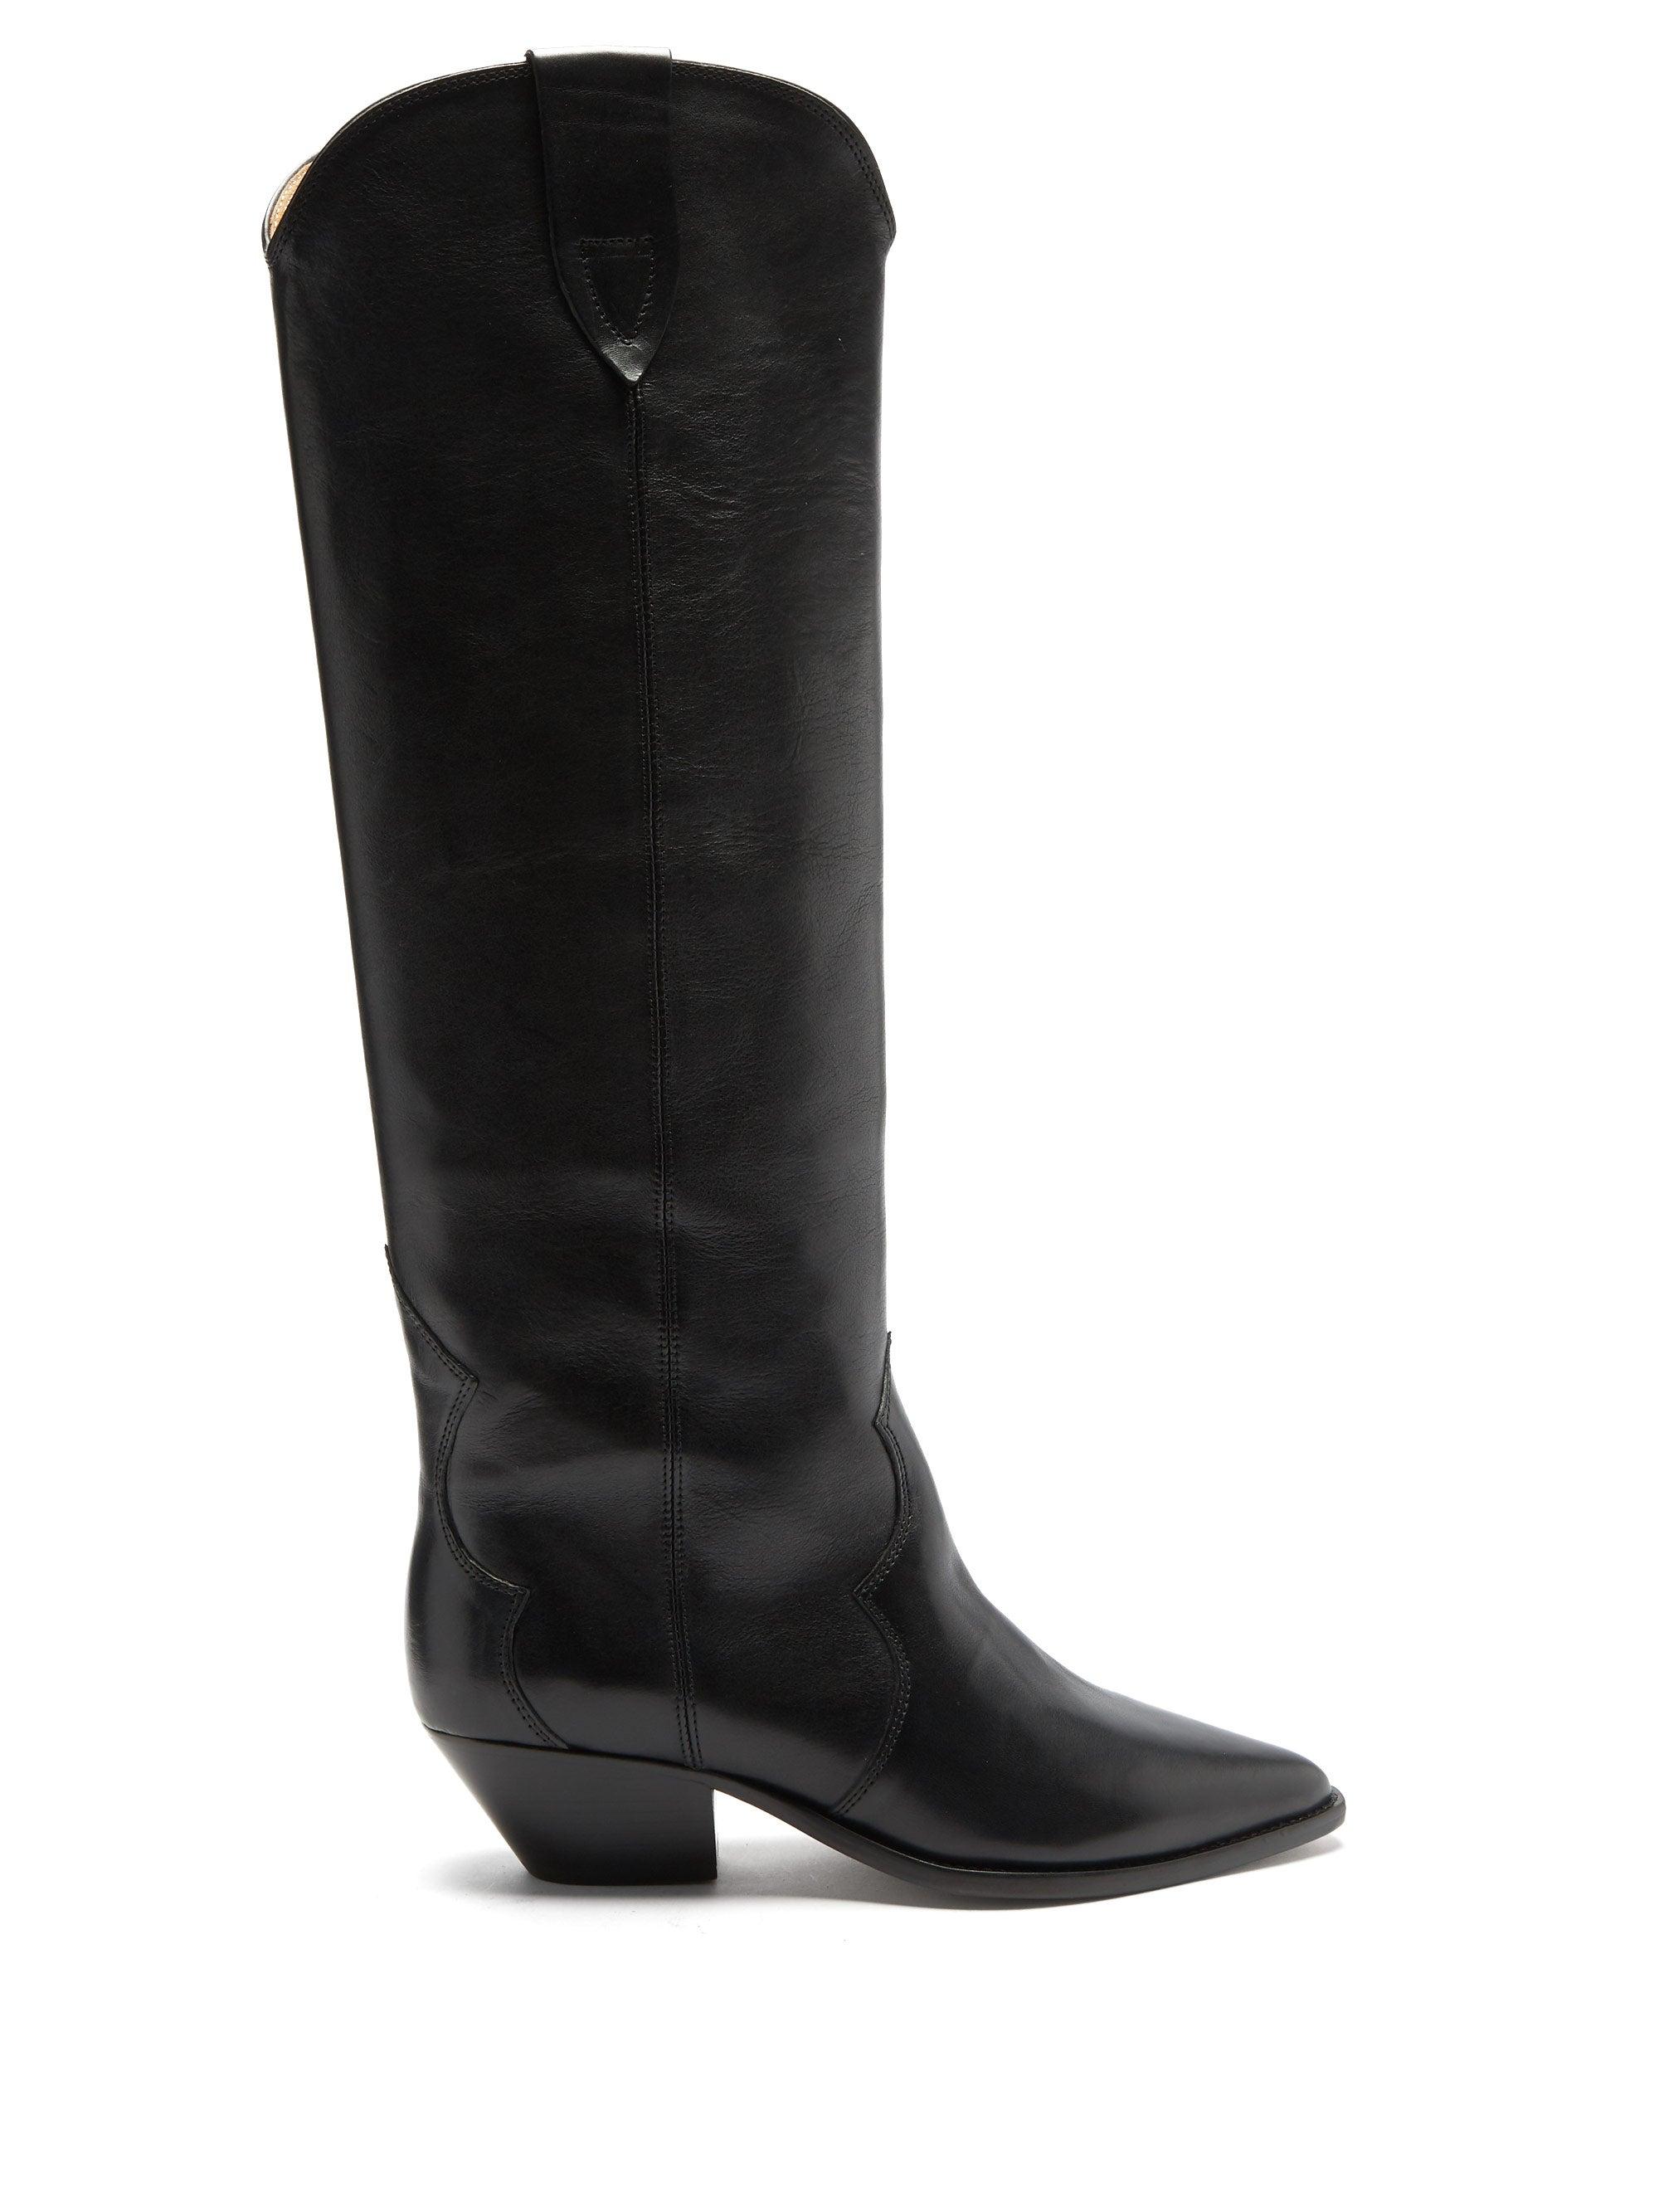 Isabel Marant Denvee Point-toe Leather Knee-high Boots in Black - Lyst